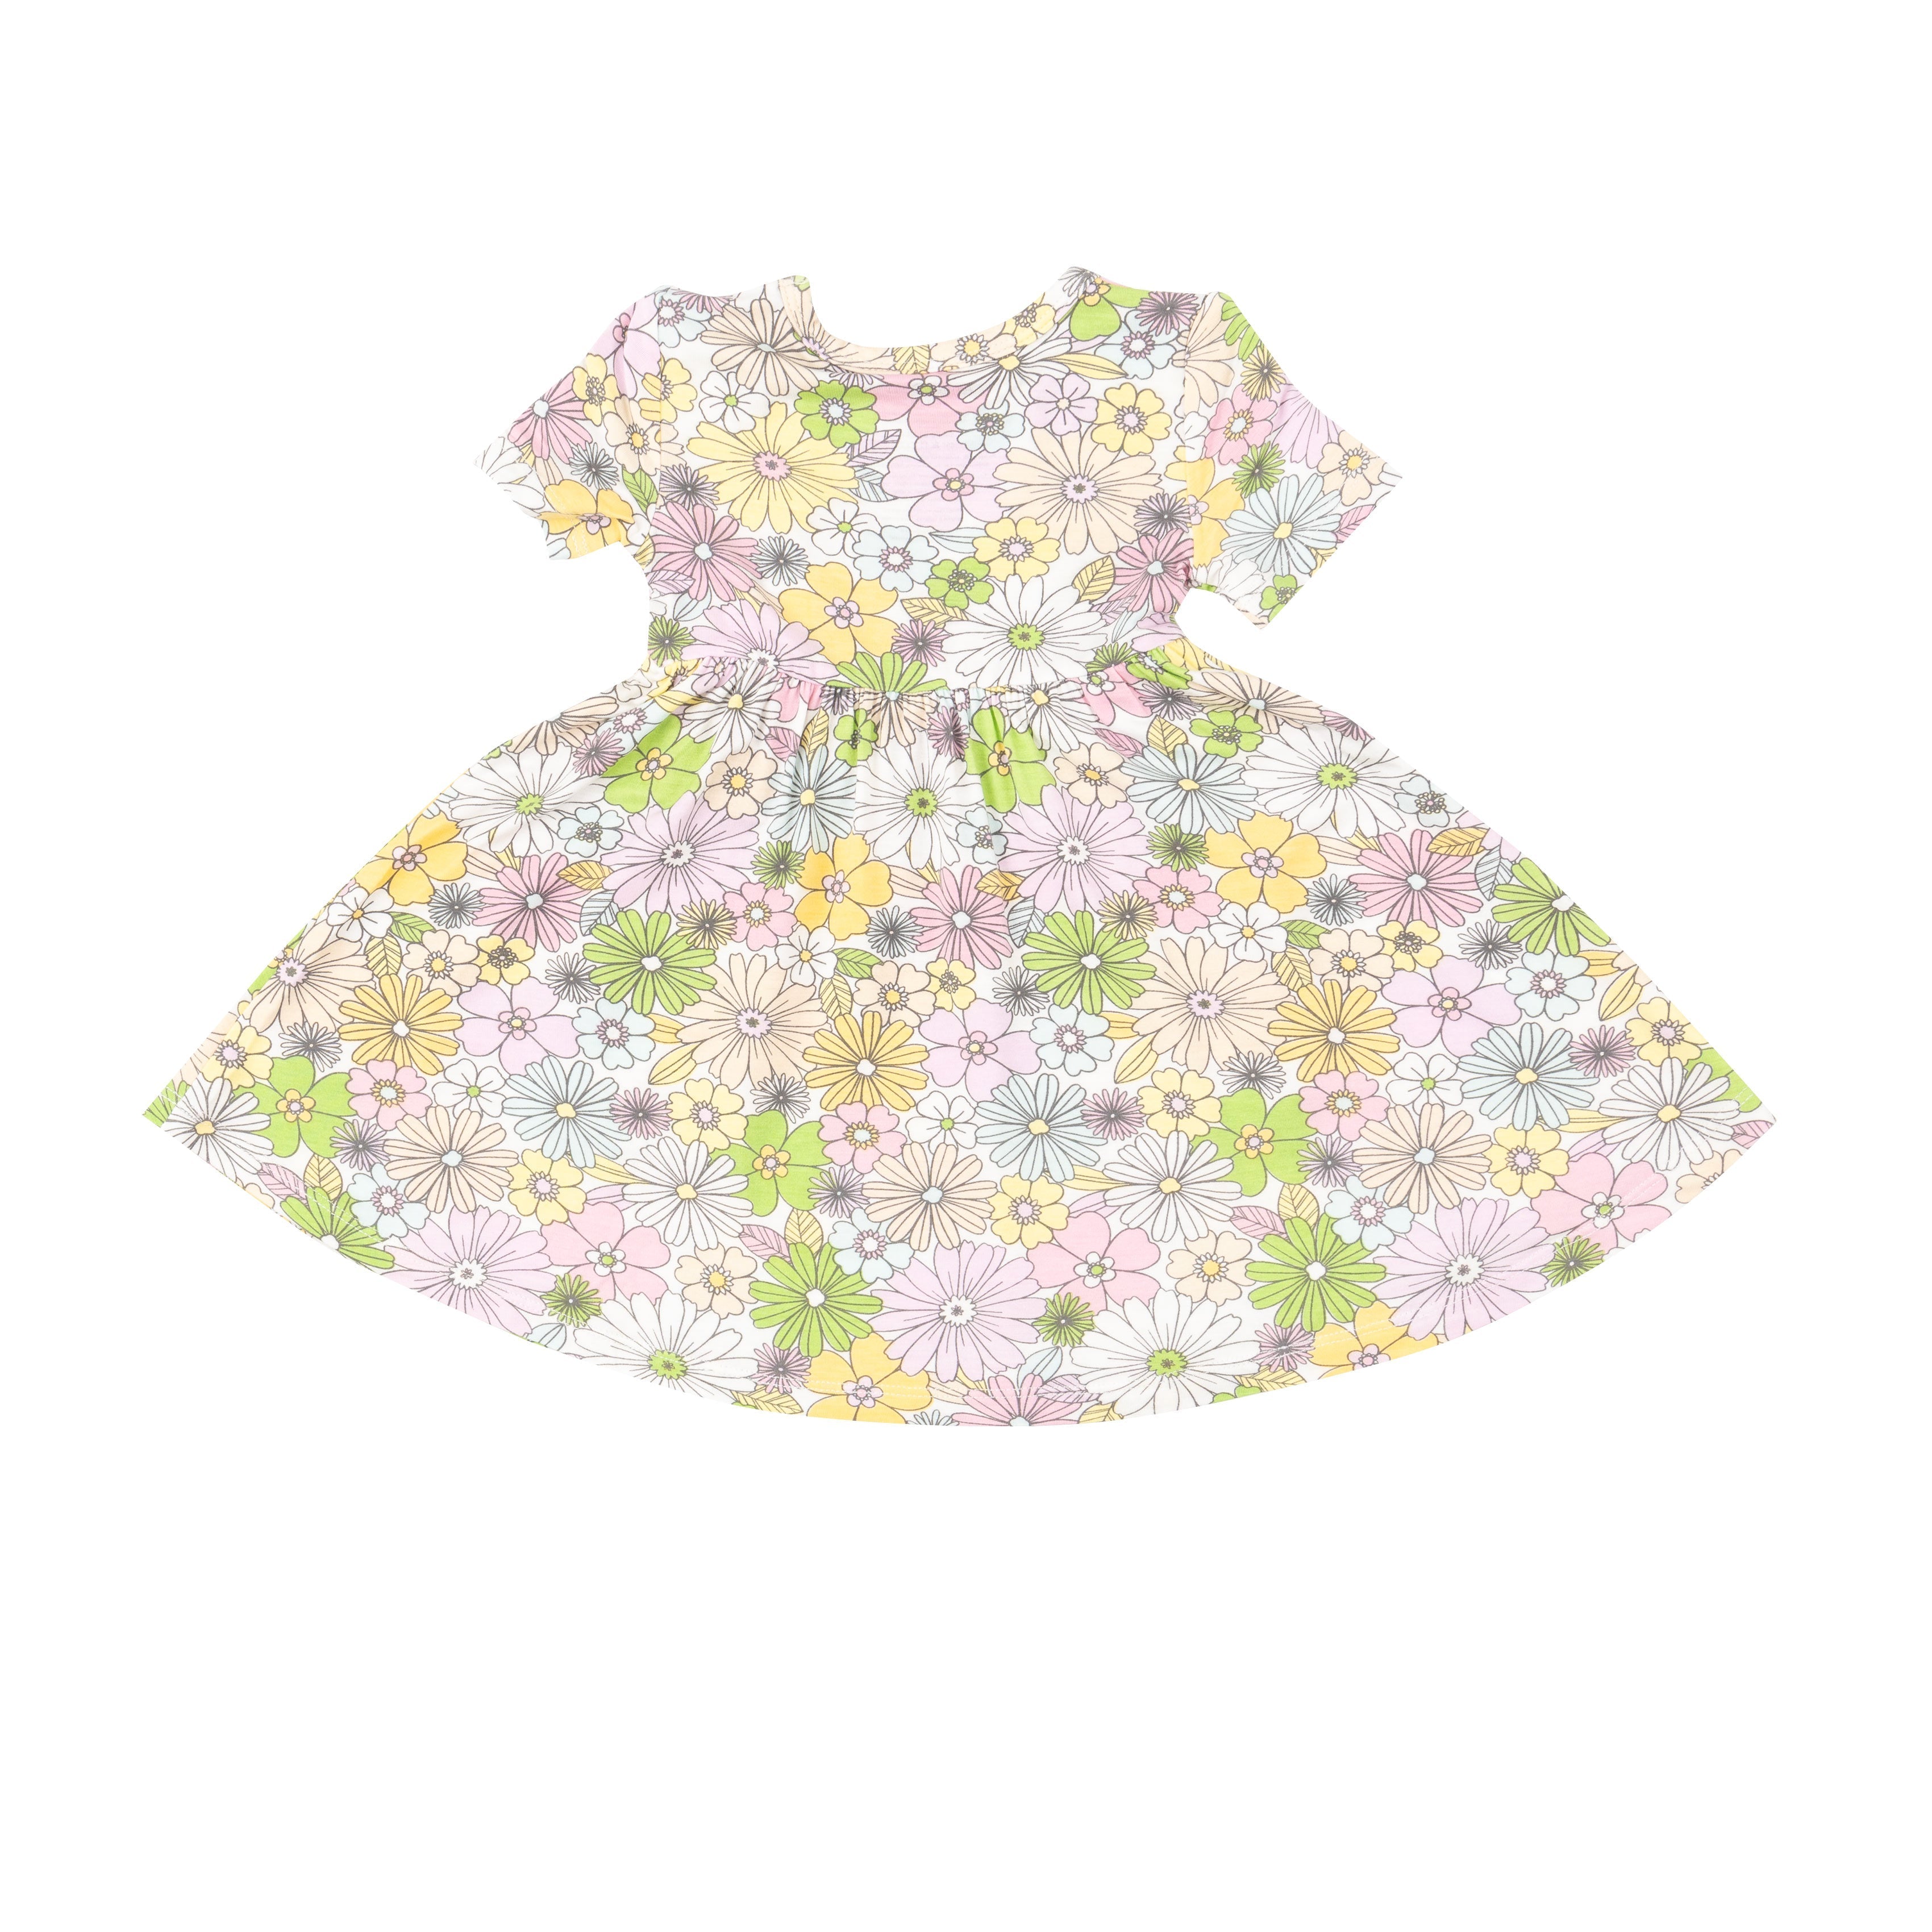 Twirly S/S Dress - Mixed Retro Floral